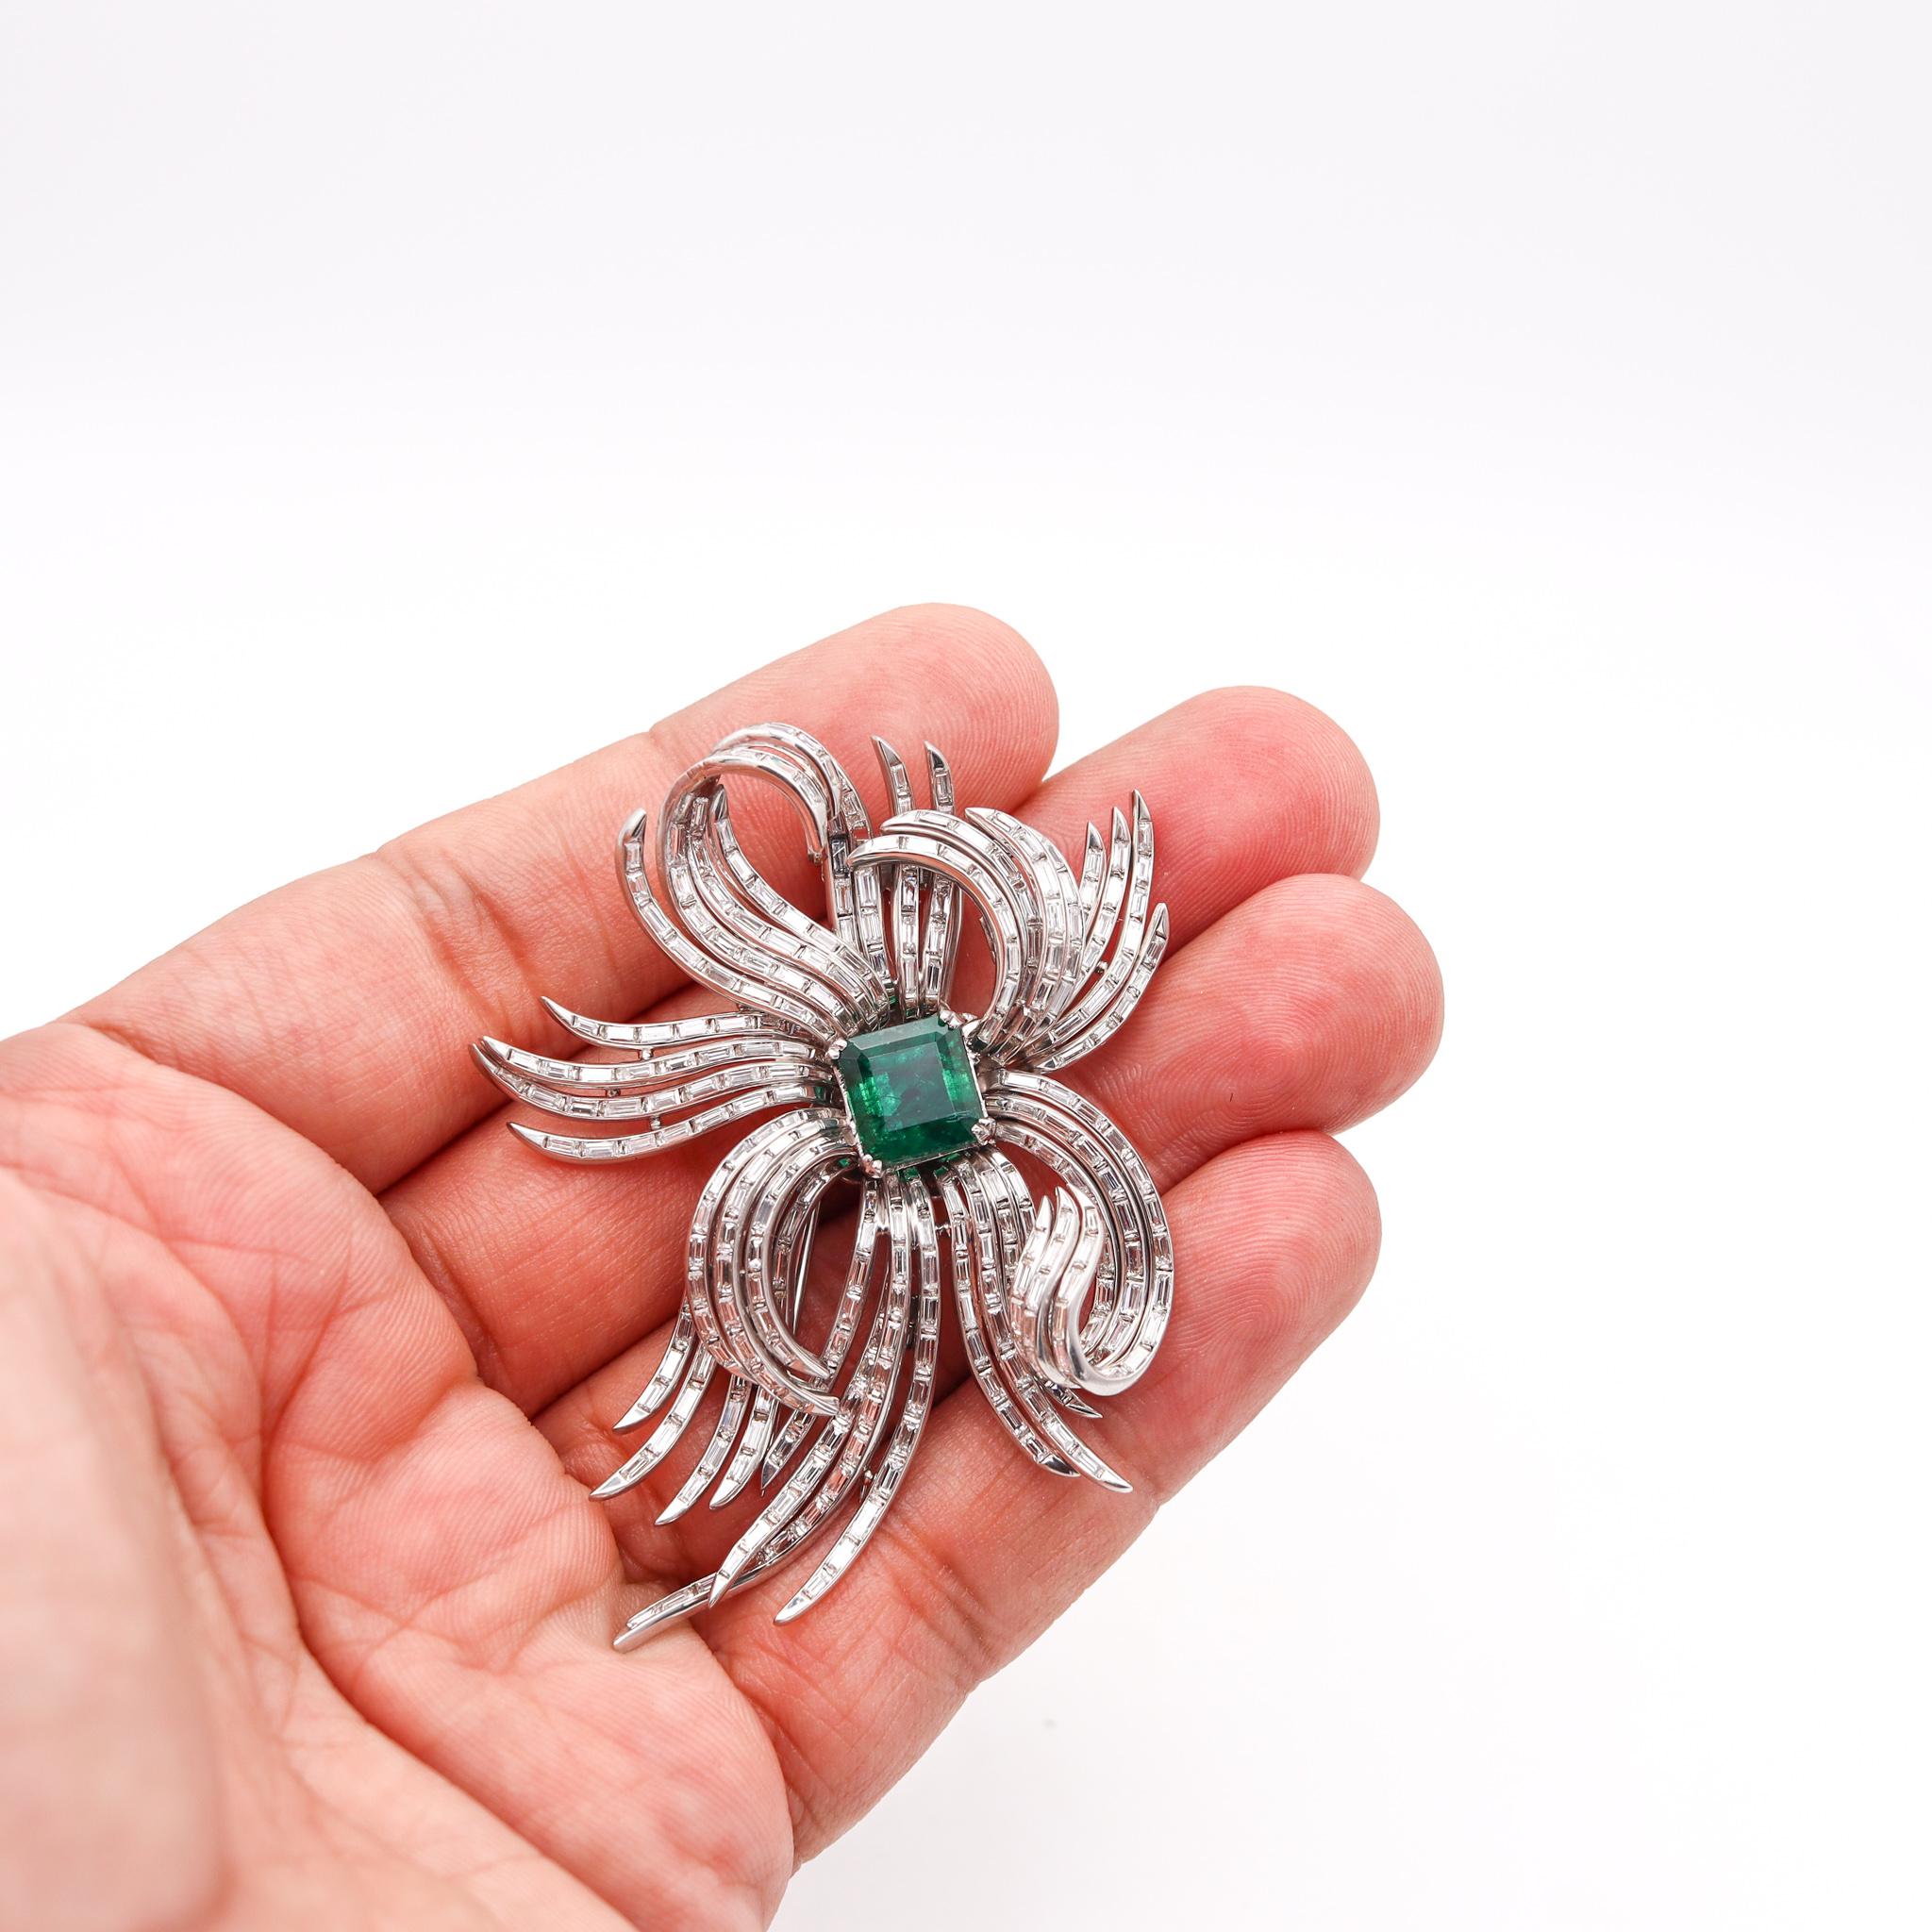 Art Deco 1935 Fabulous Brooch In Platinum With 17.72 Ctw In Diamonds And Emerald In Excellent Condition For Sale In Miami, FL